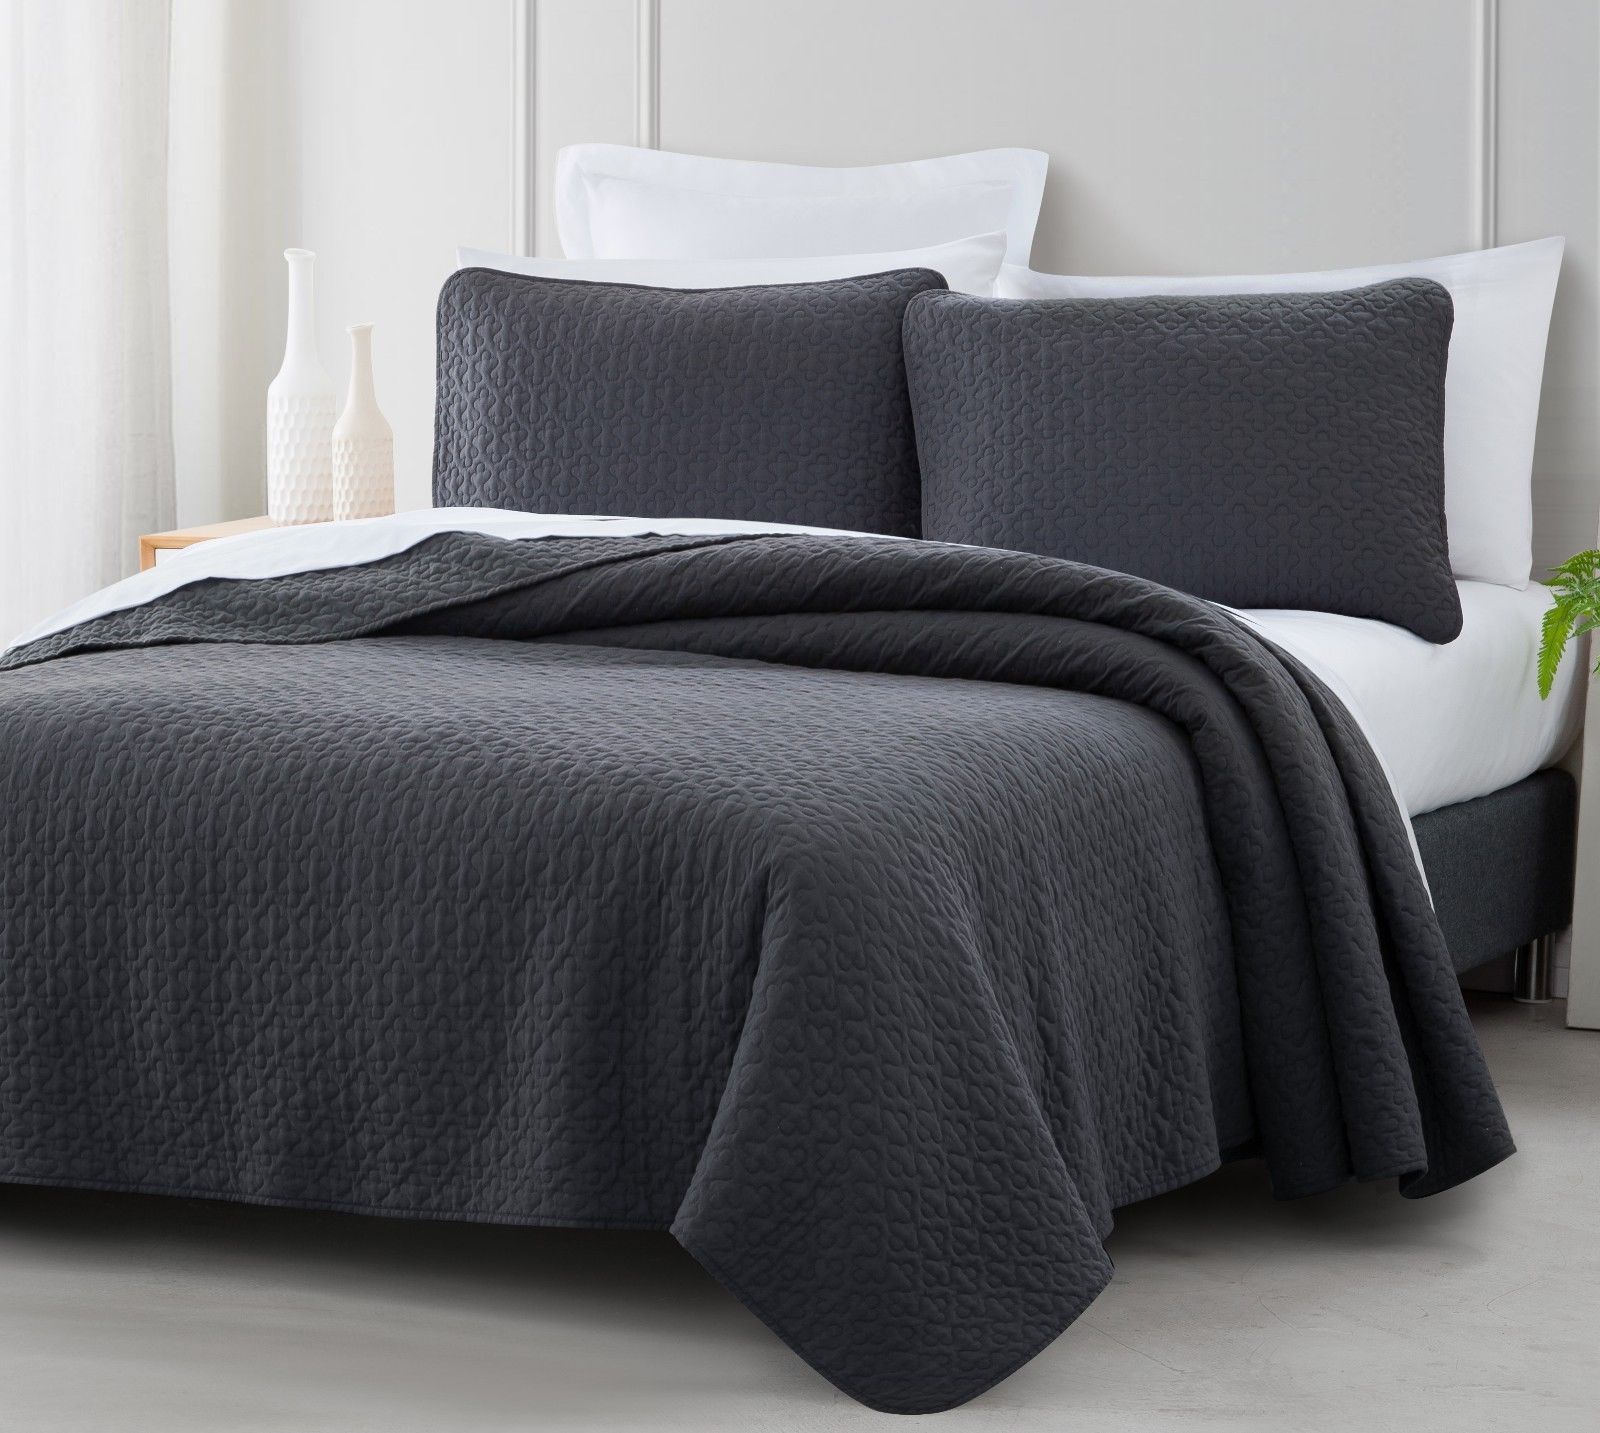 Vega Quilted Bedspread Set Charcoal Grey Stitched pattern 100% Cotton Filling - $46.44 - $52.14